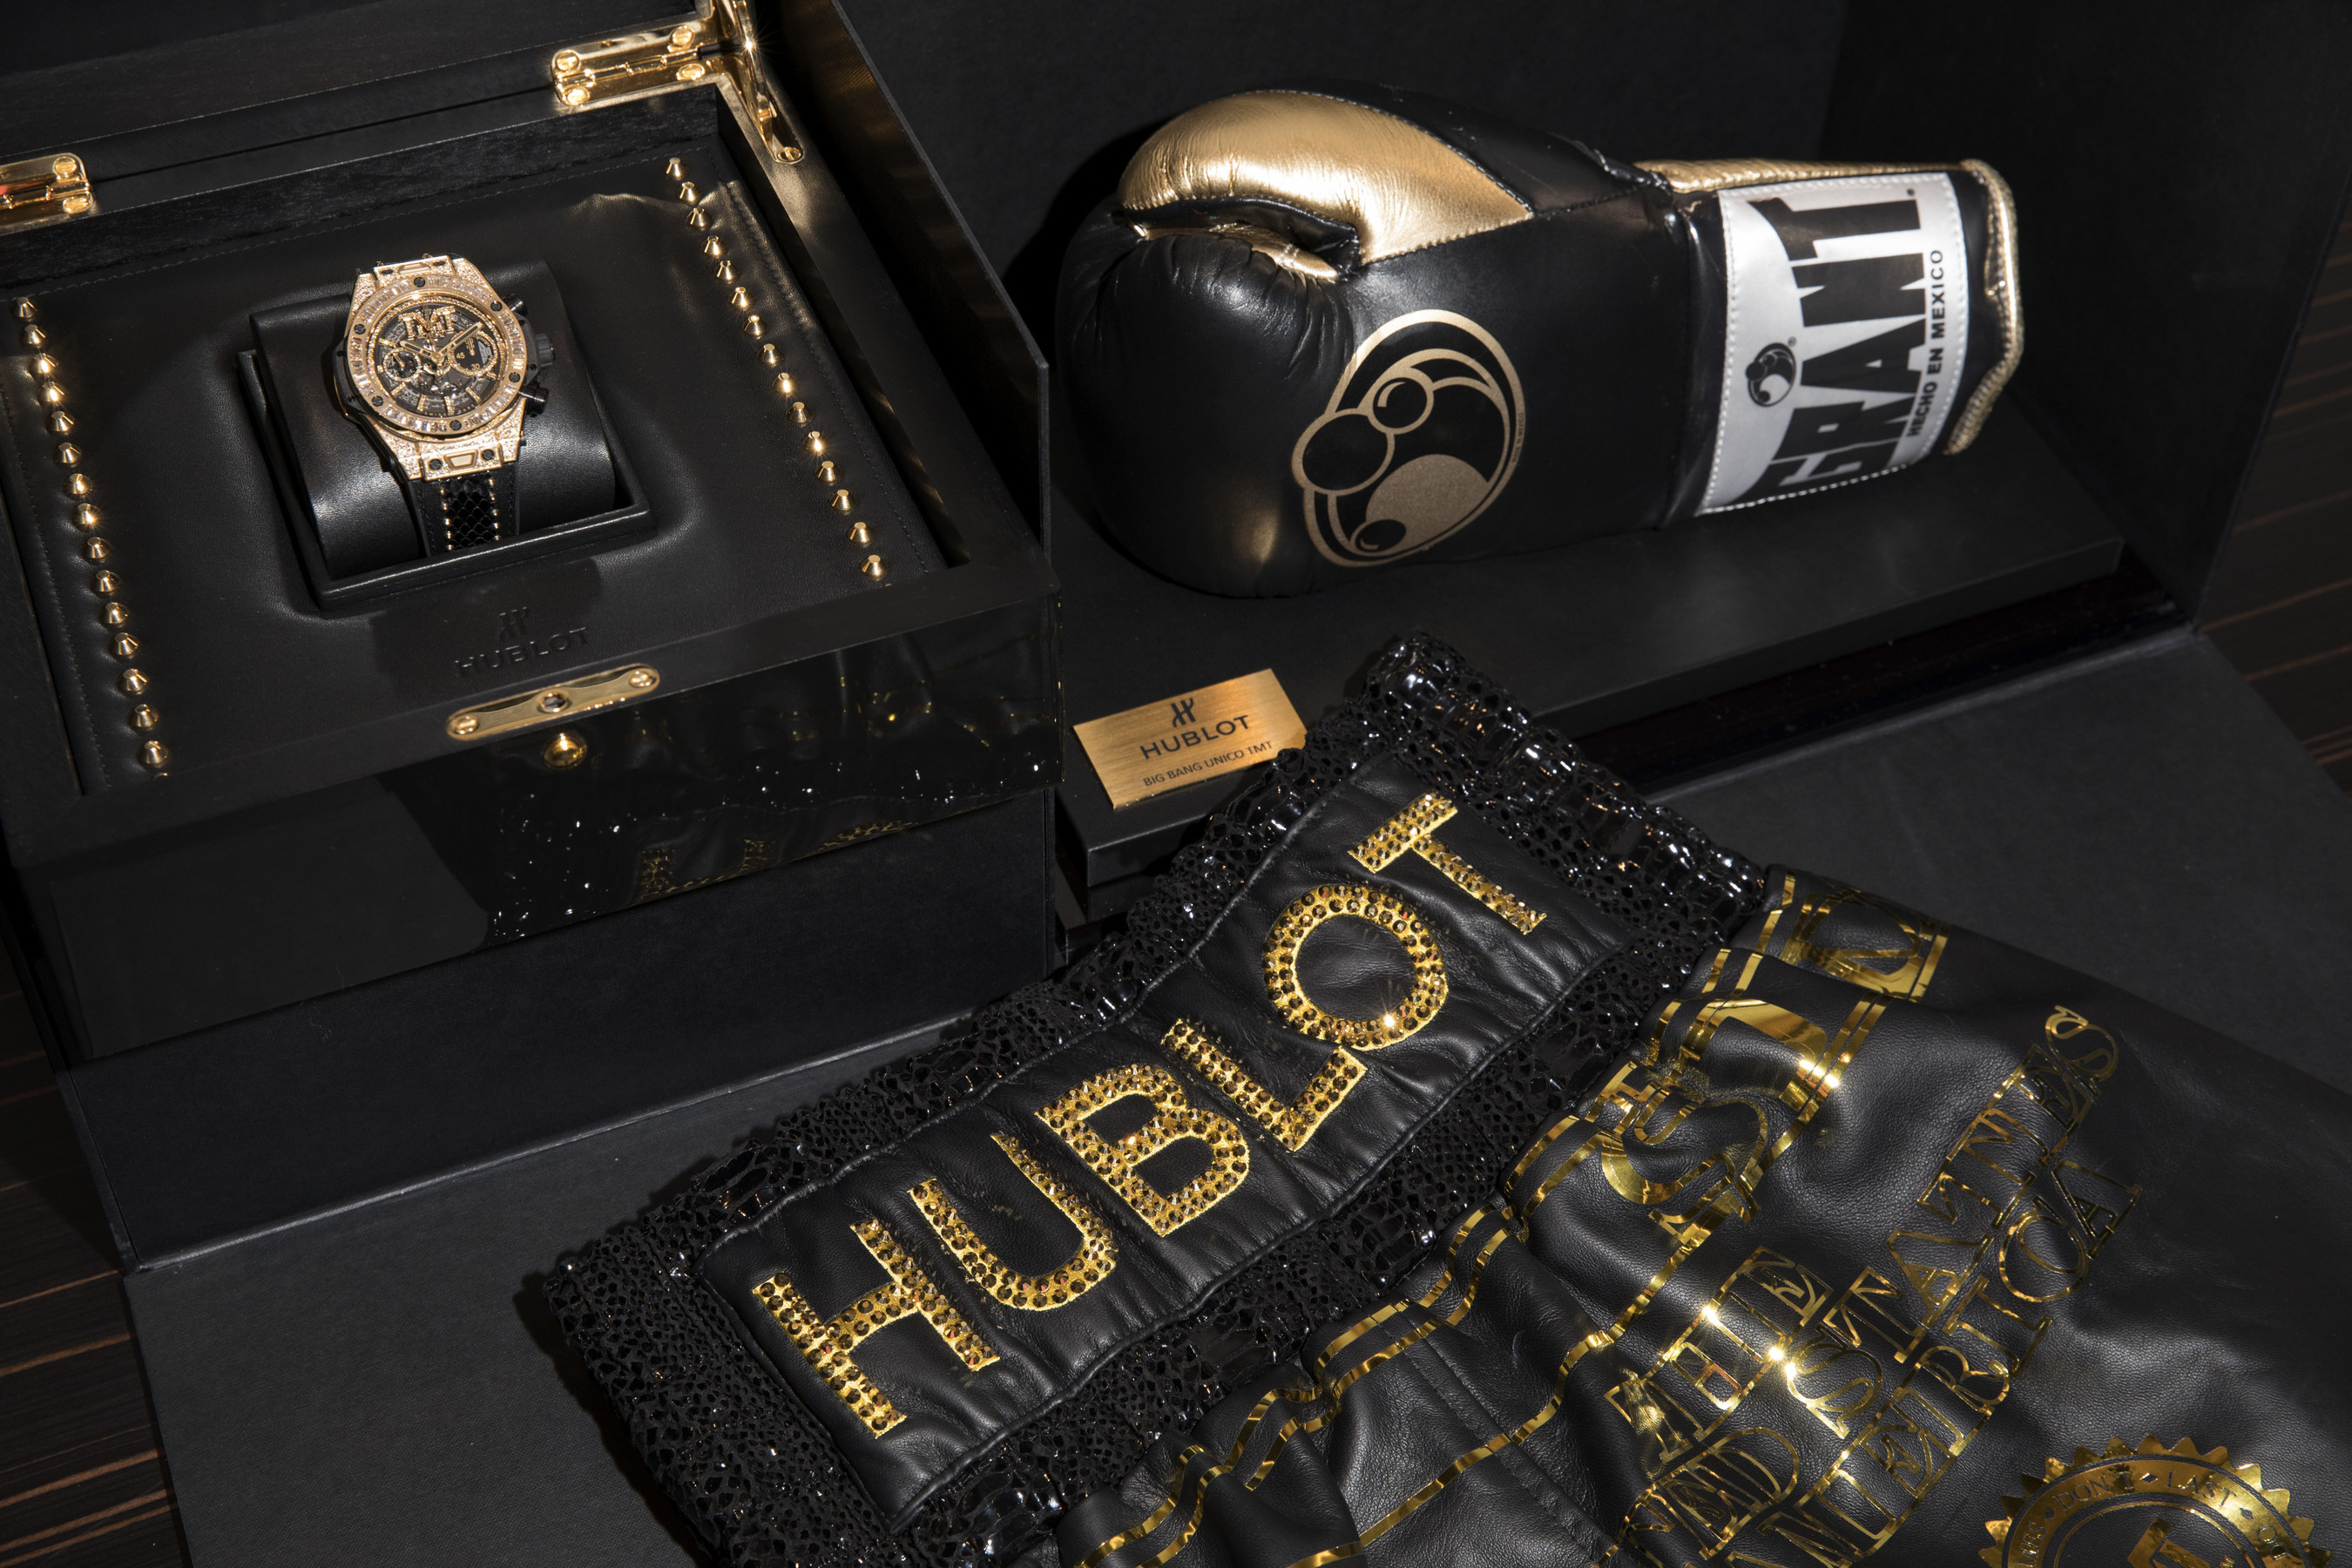 The Best Ever Big Bang Unico TMT, a Chronograph for the Undefeated Champion of the Noble Art